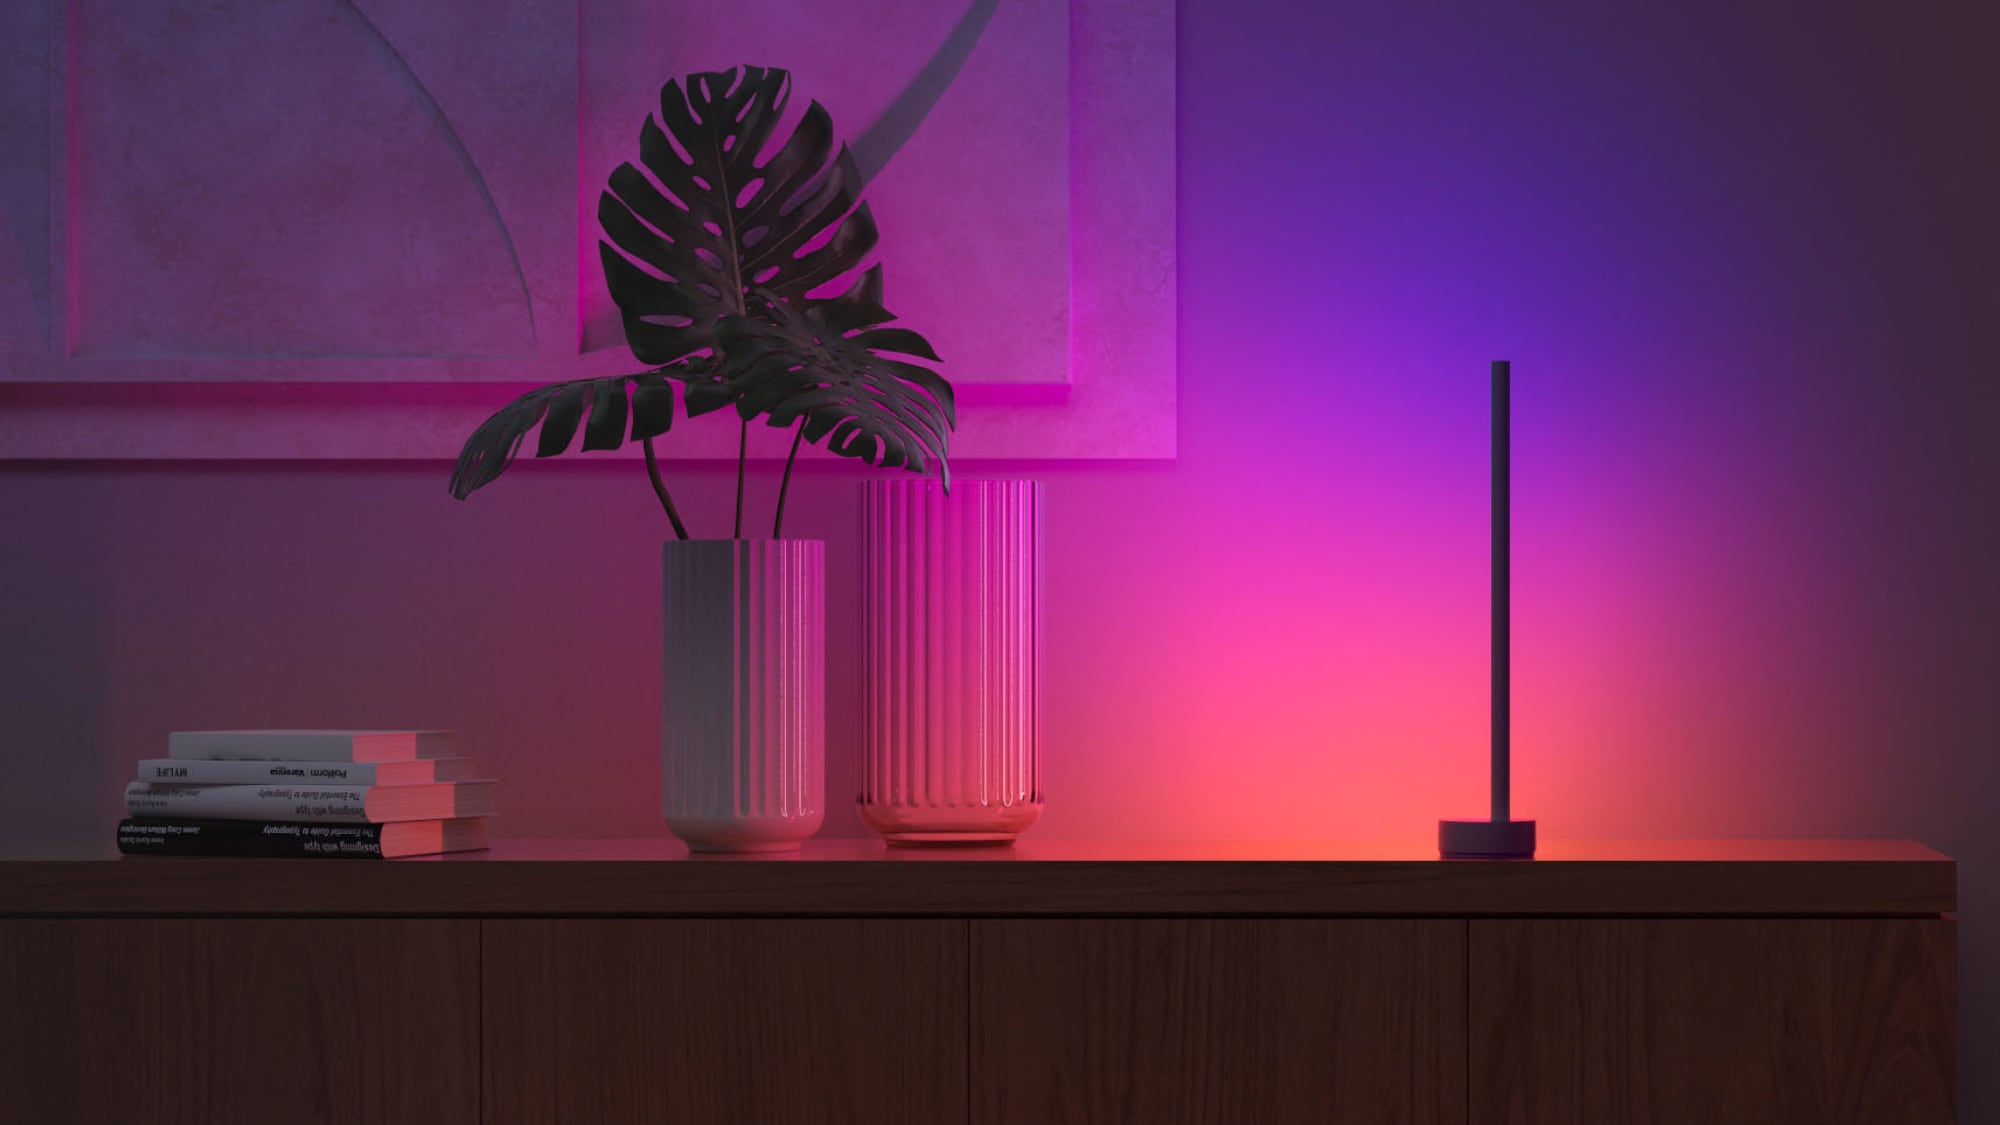 Philips Hue Buying Guide (2023) 